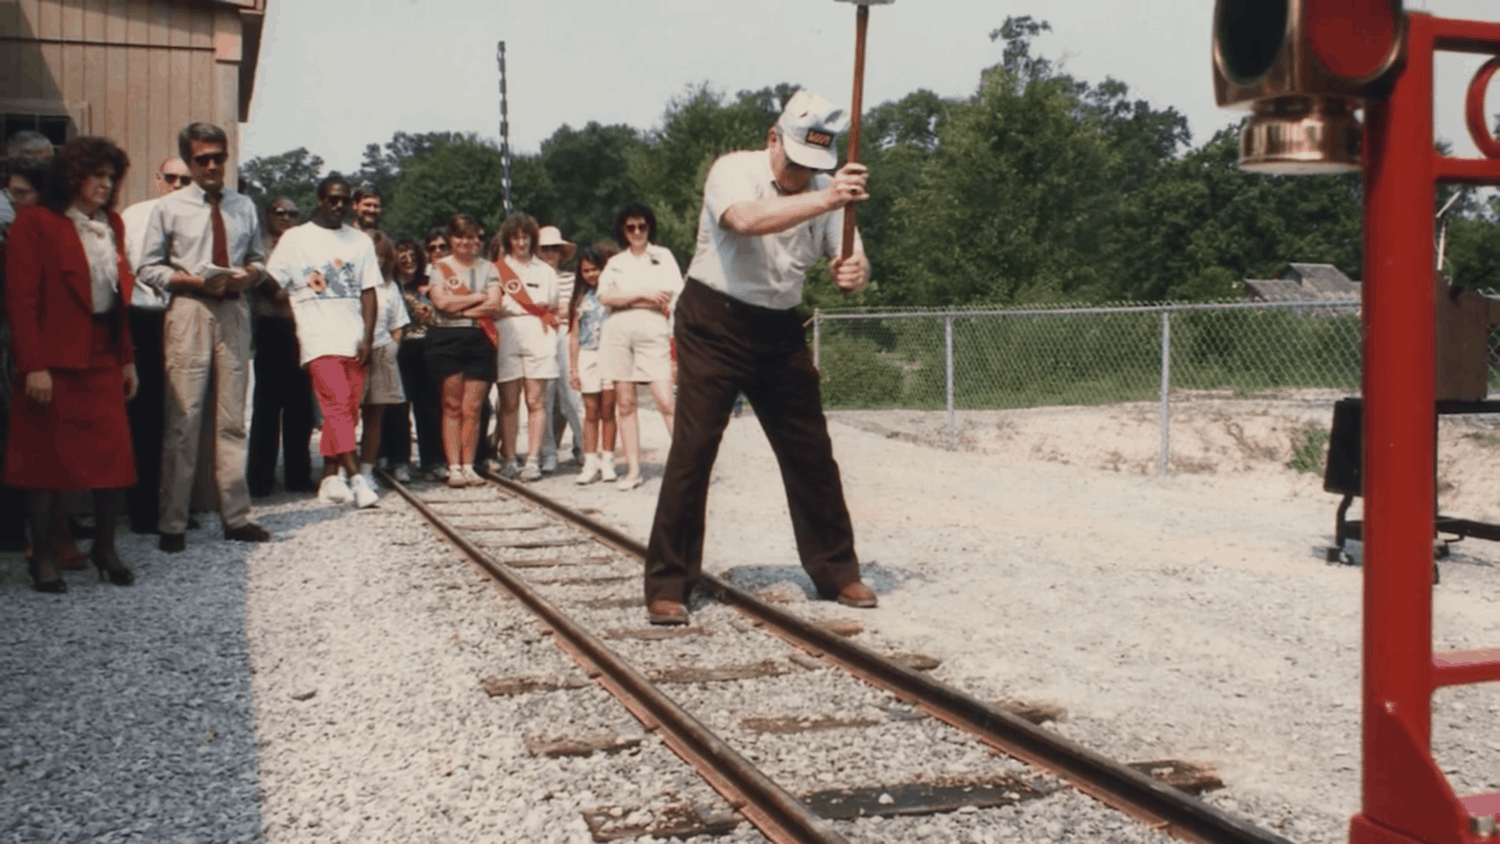 BREC employee hammers the final train track in BREC